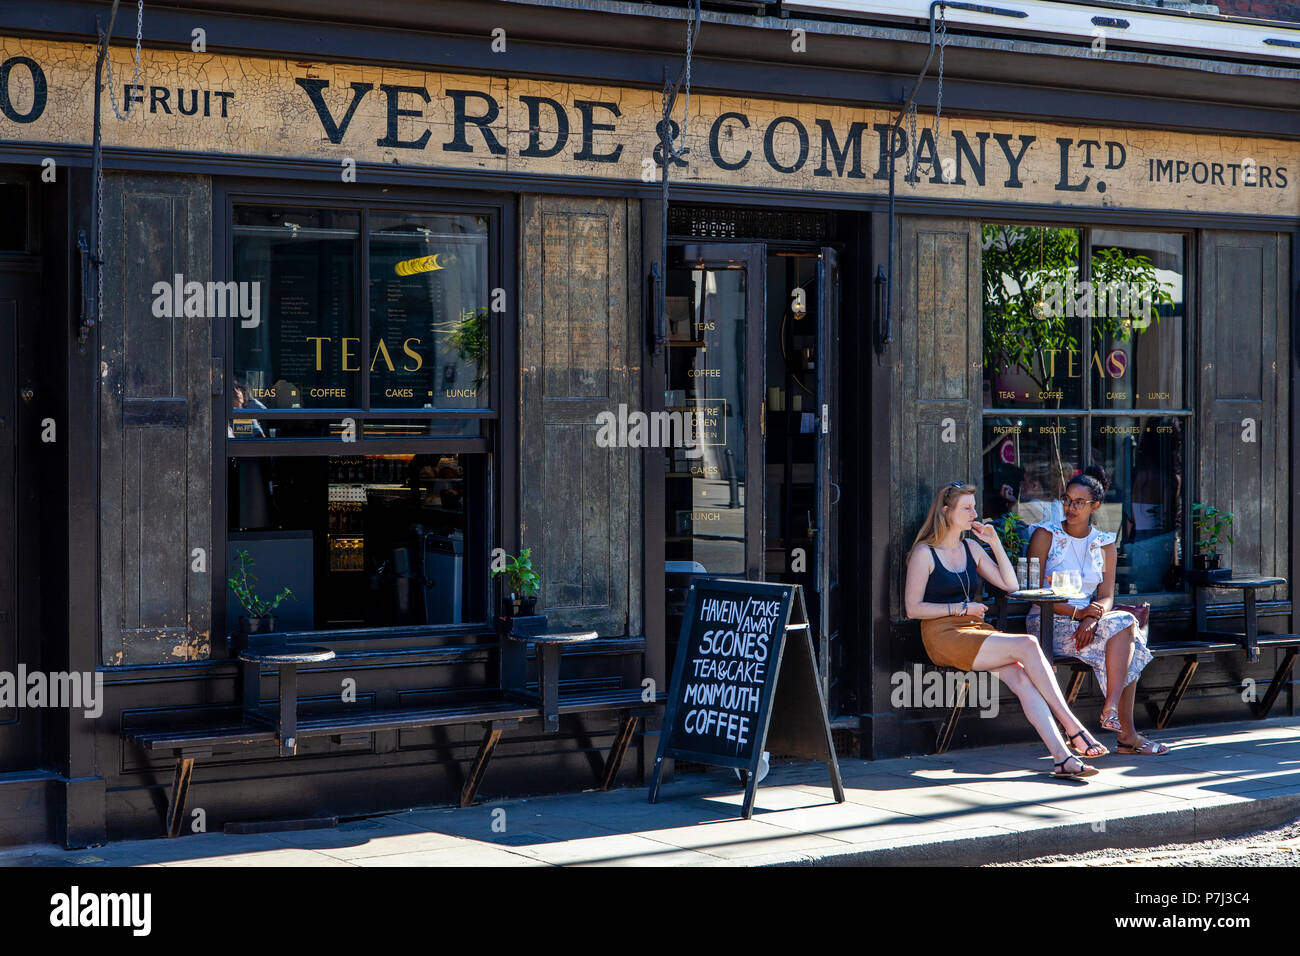 Two Young Women Sitting Outside Verde & Company Cafe, Spitalfields, London, England Stock Photo